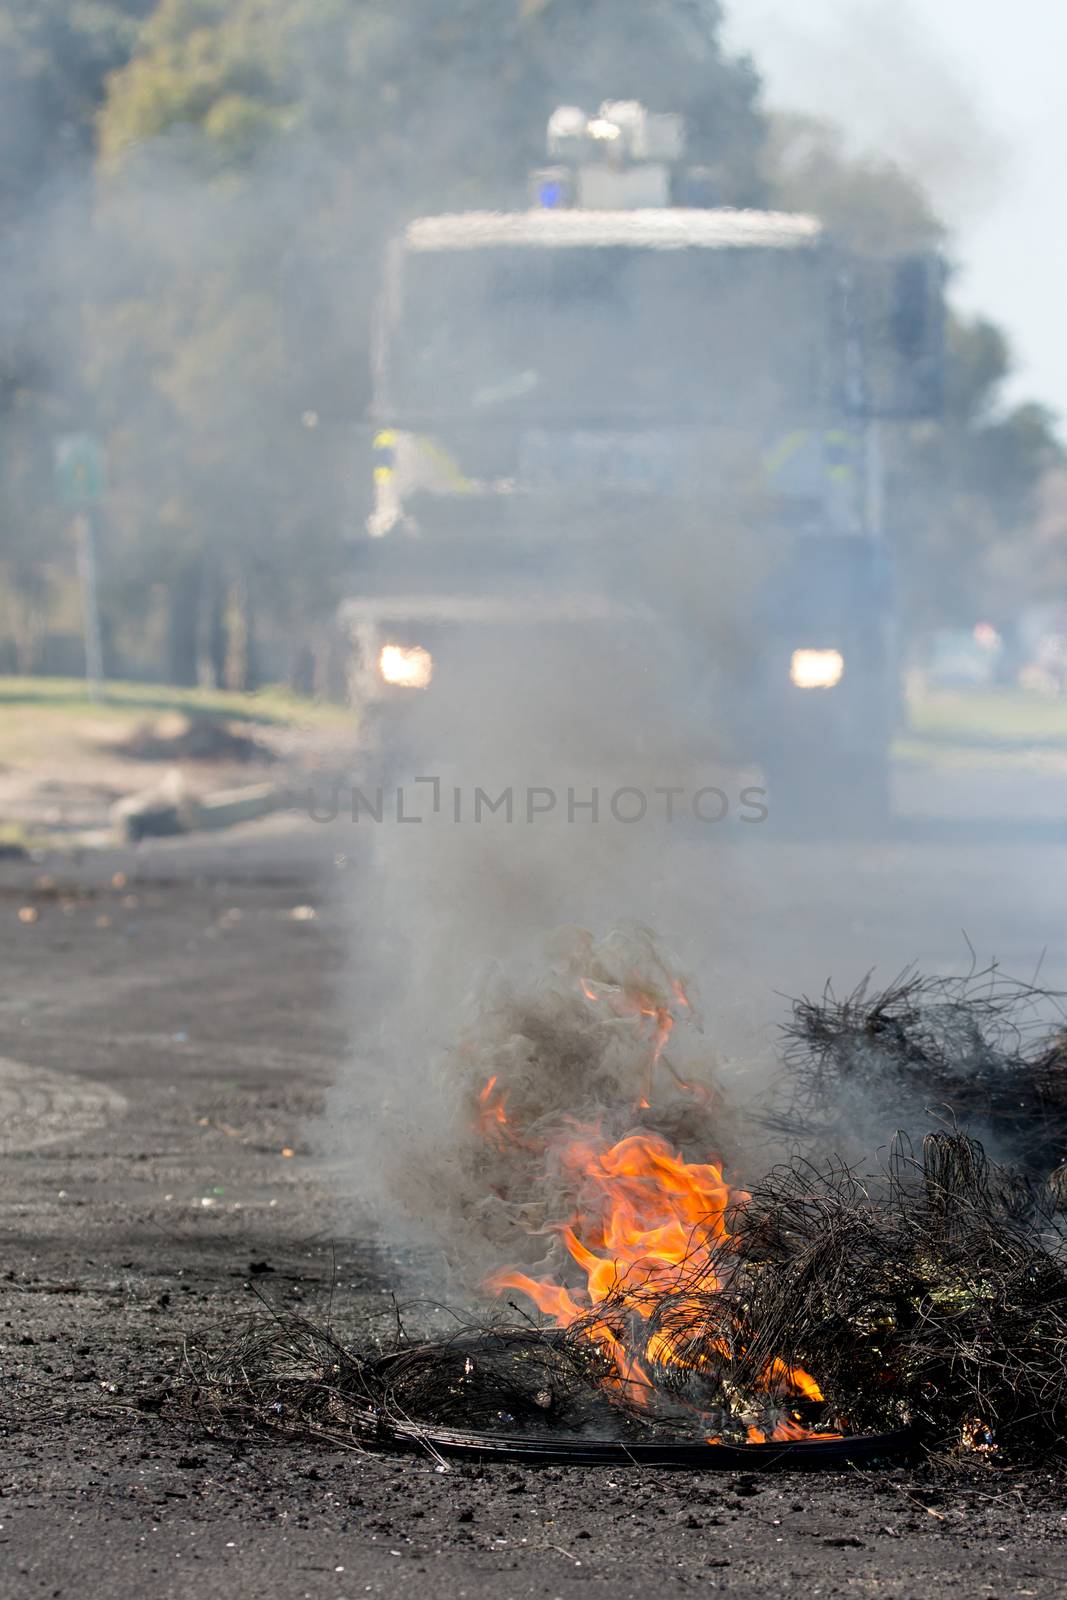 Protest Action with Burning Tyres in Road by fouroaks